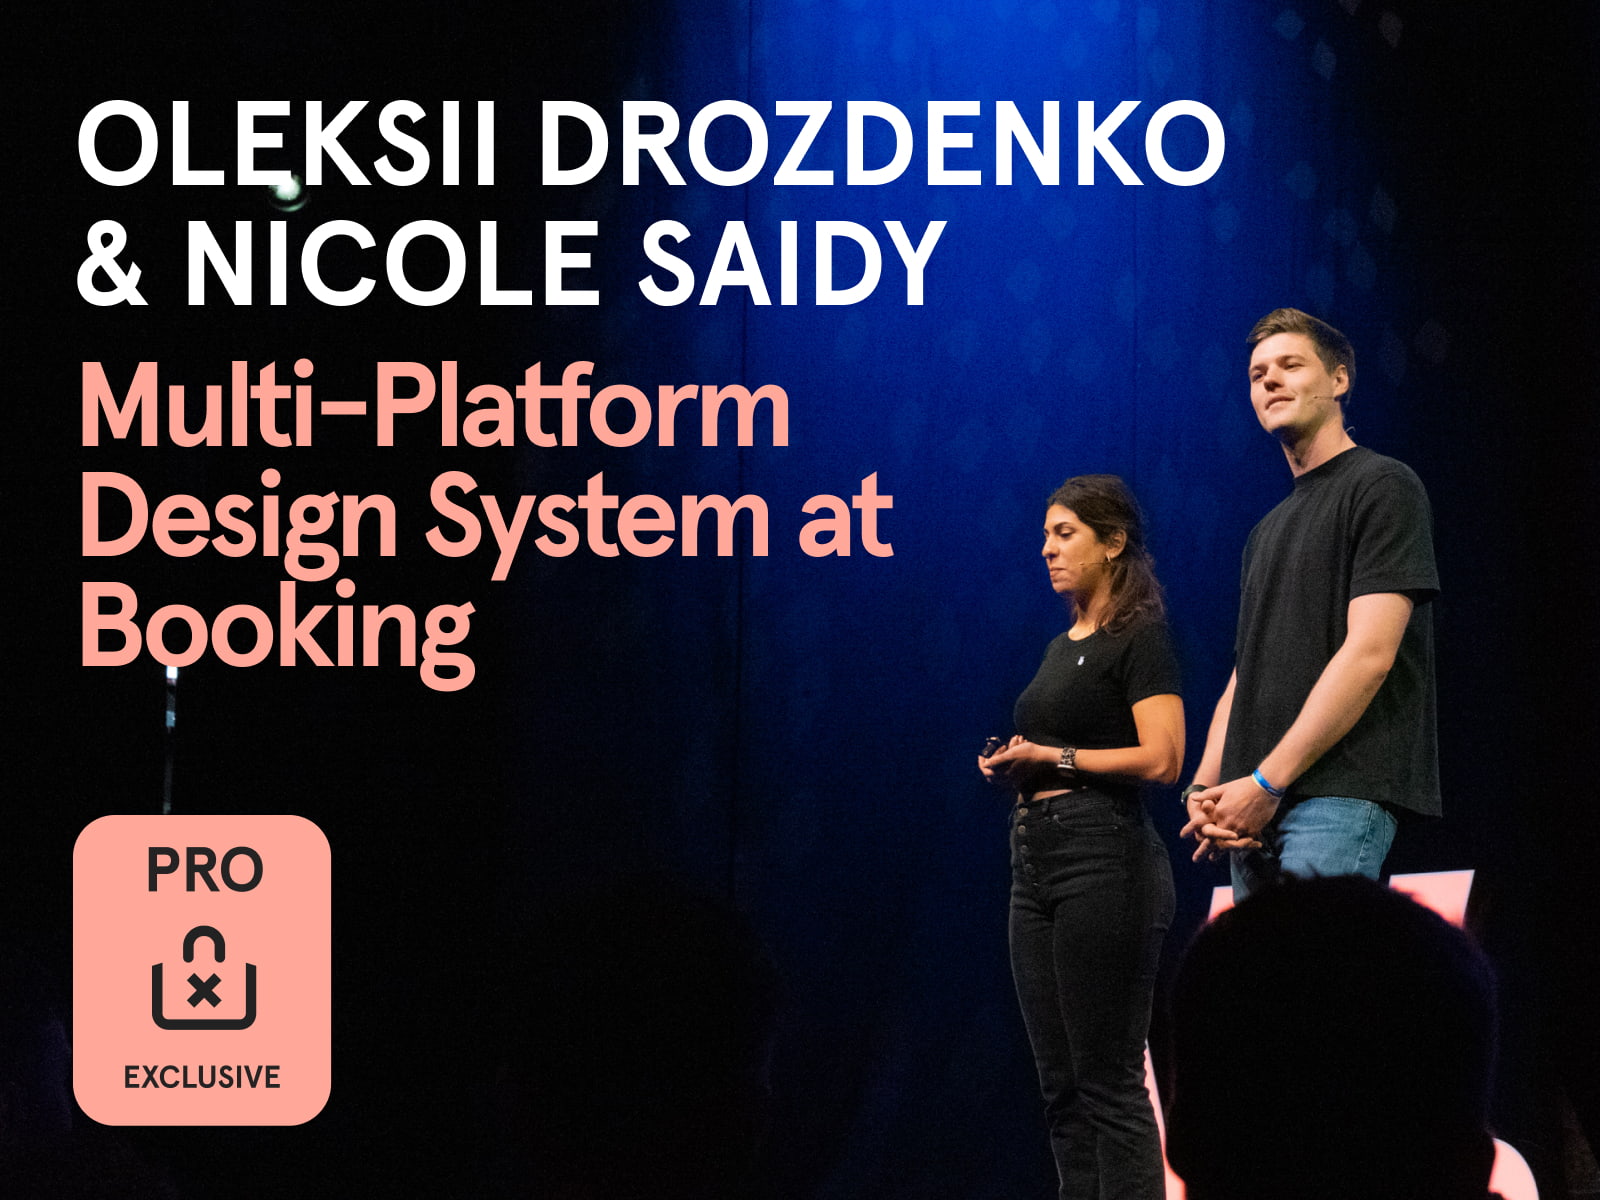 New PRO Content available: watch Nicole Saidy & Oleksii Drozdenko's new talk from Awwwards Conference Amsterdam